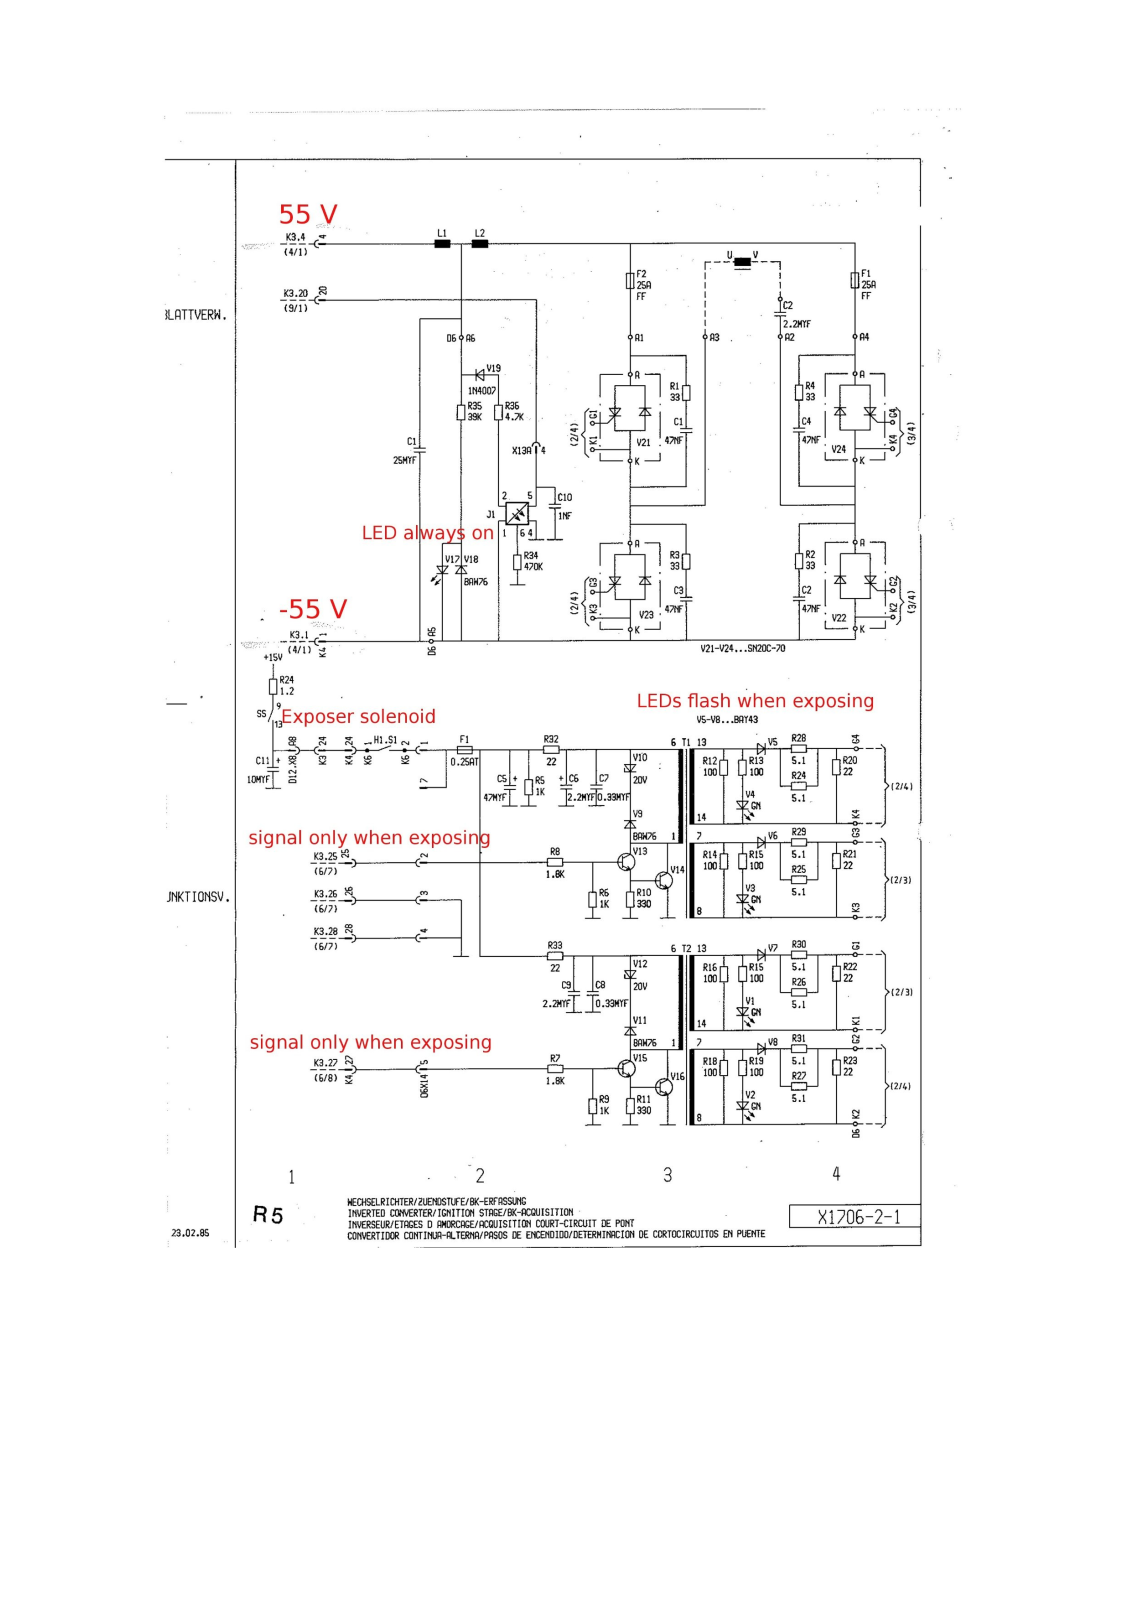 Siemens Polymobil 2 Circuit diagrams with remarks